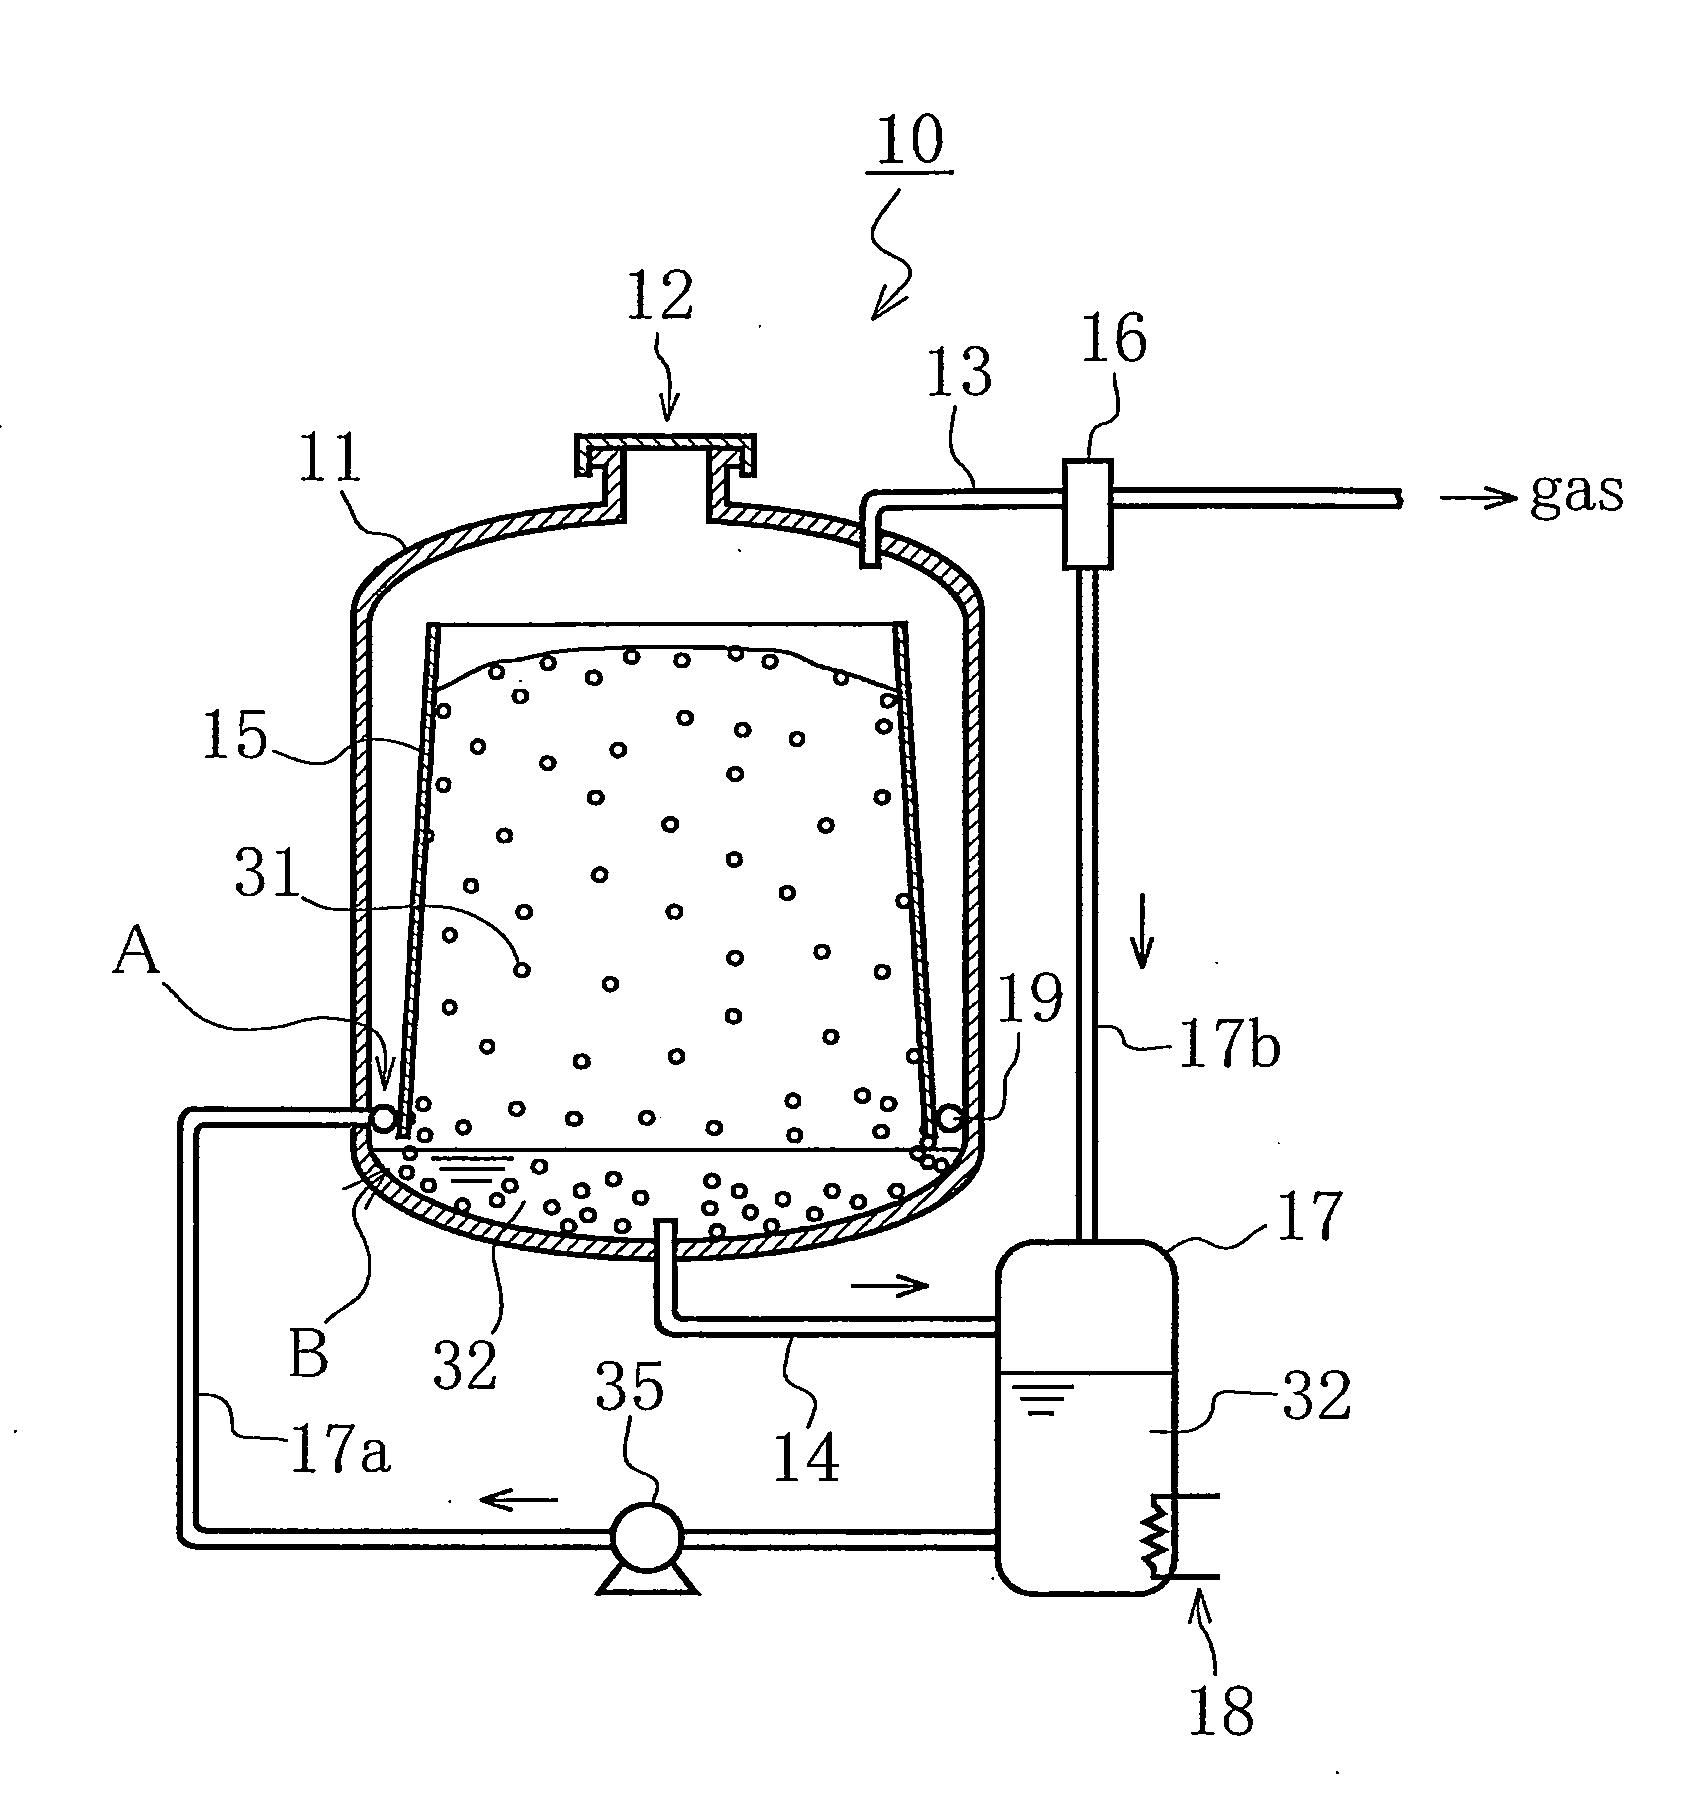 Apparatus and method for gasifying gas hydrate pellet